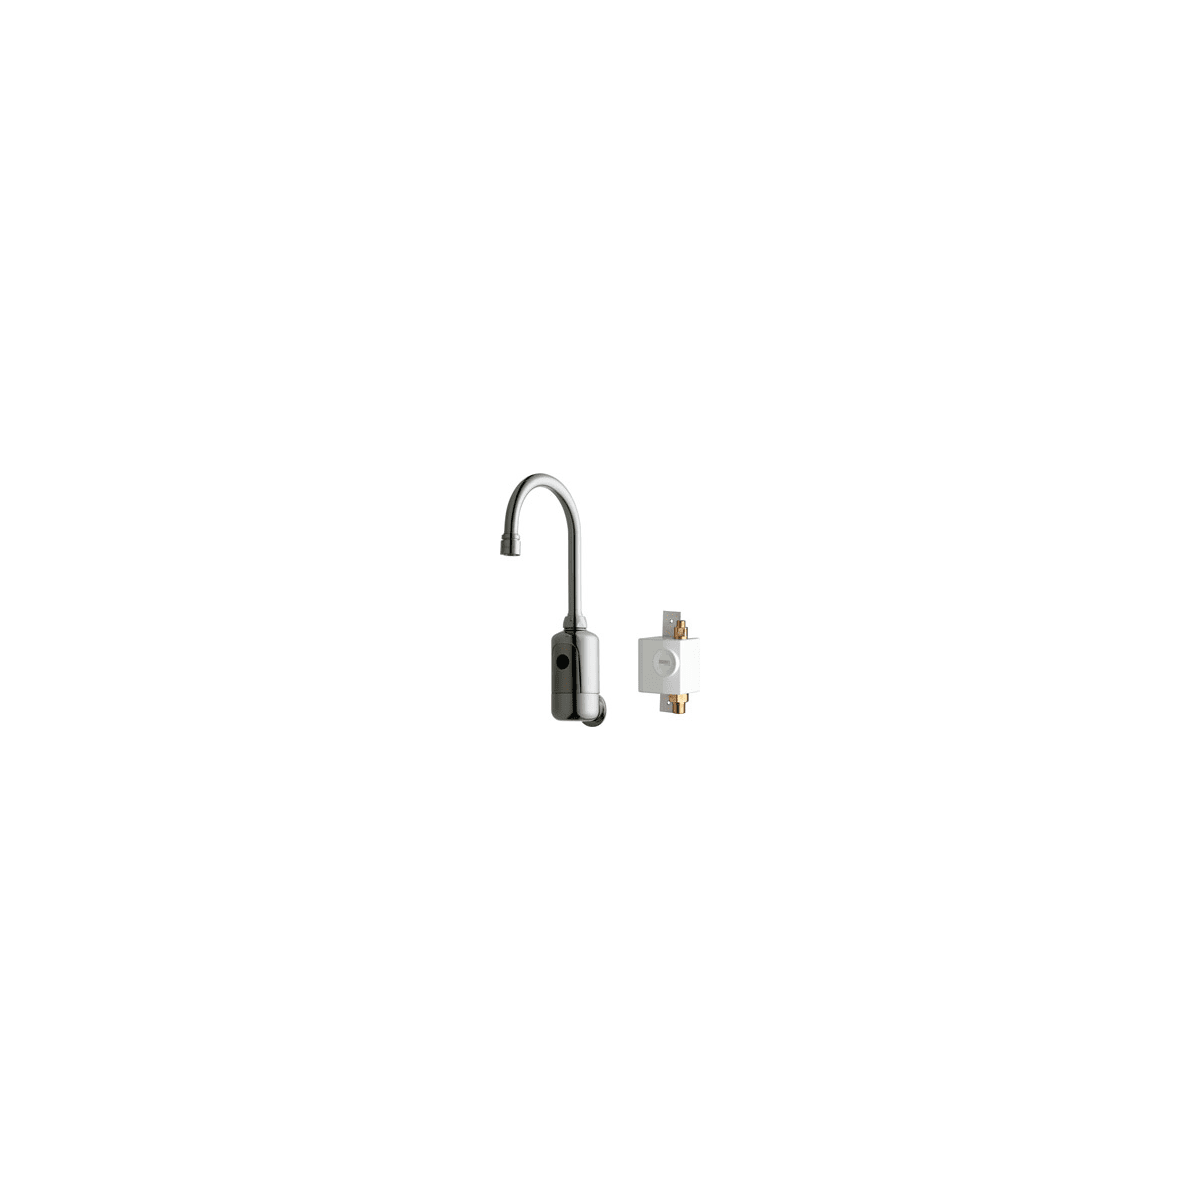 Chicago Faucets 116 954 Ab 1 Chrome Wall Mounted Metering Faucet